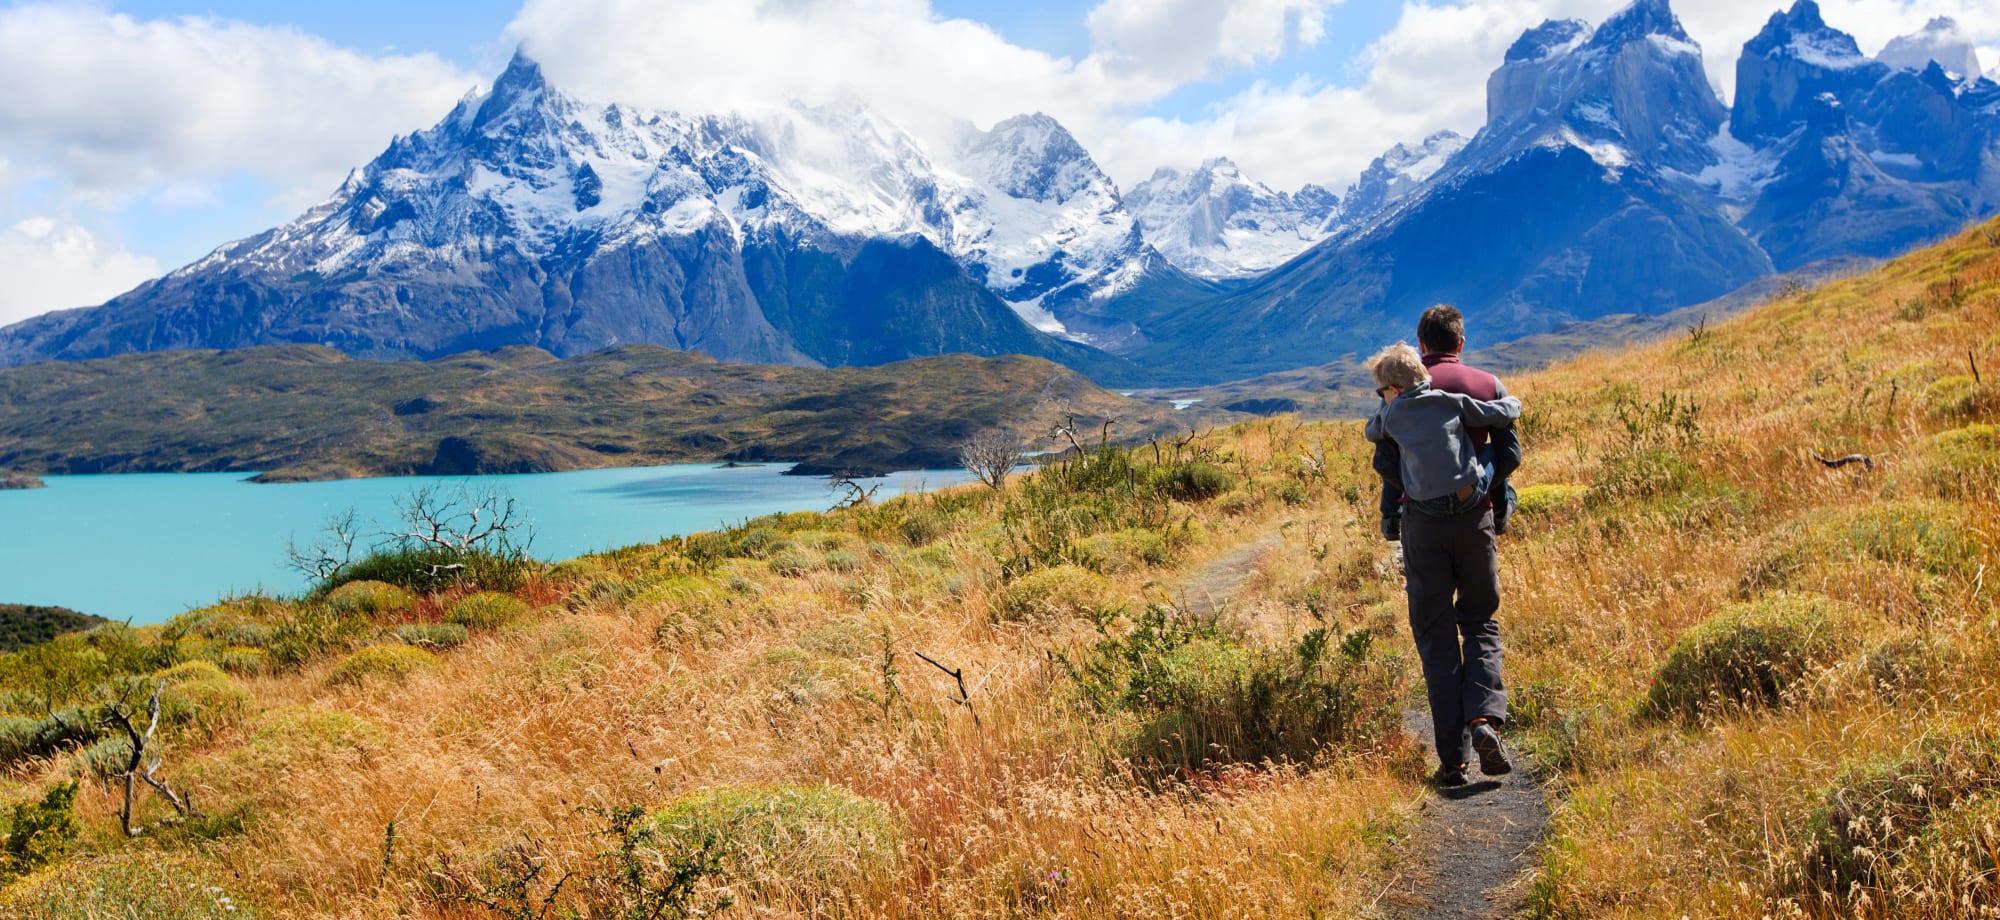 Family of two, father and son, enjoying hiking and active travel in Torres del Paine National Park.